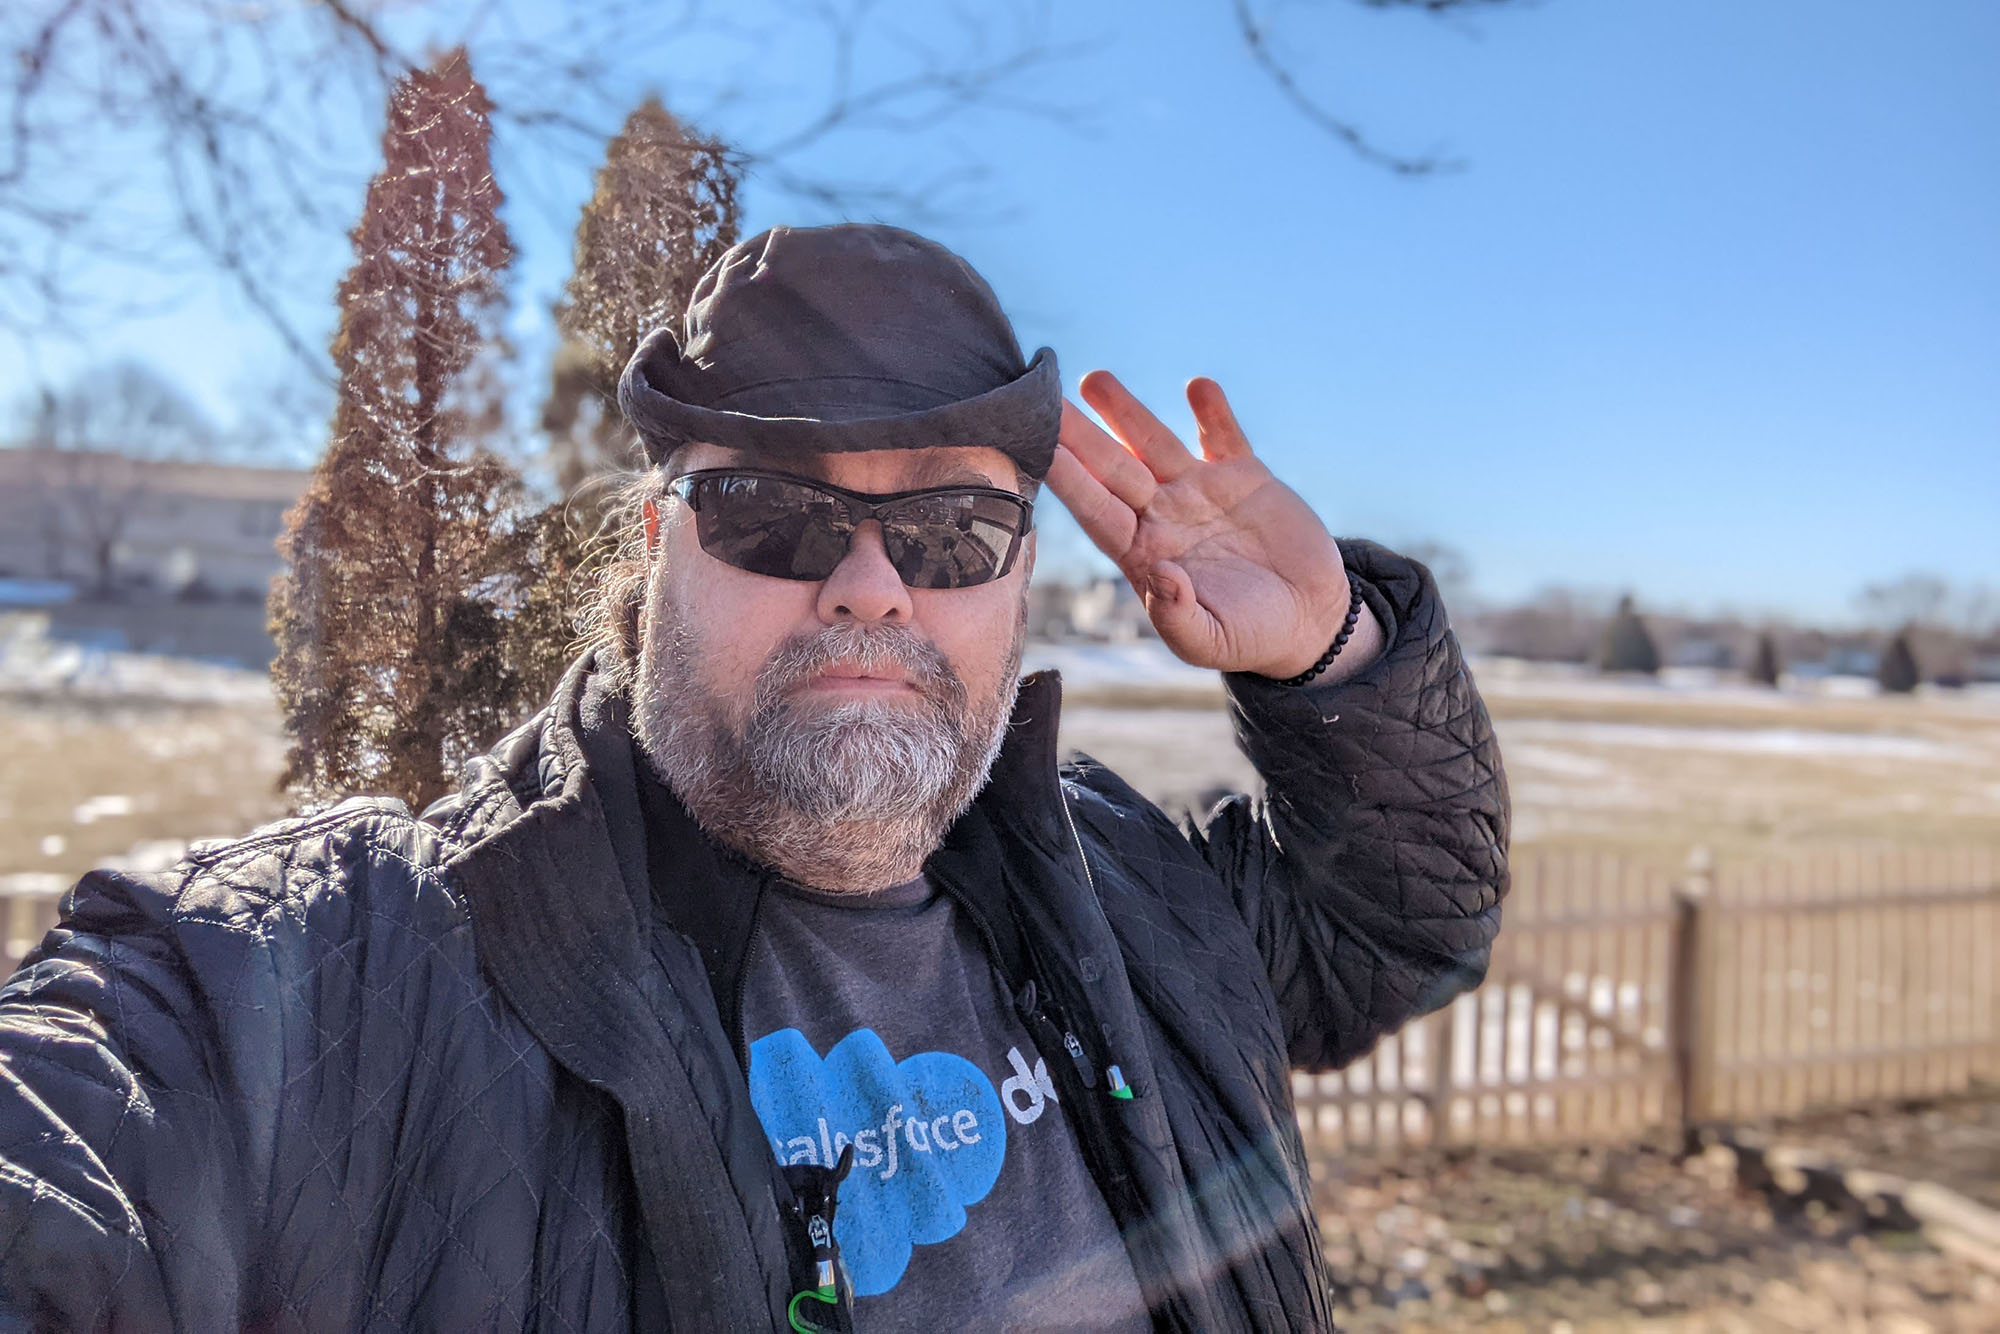 This is a sample photo of portrait mode from the selfie camera of the Pixel 6.